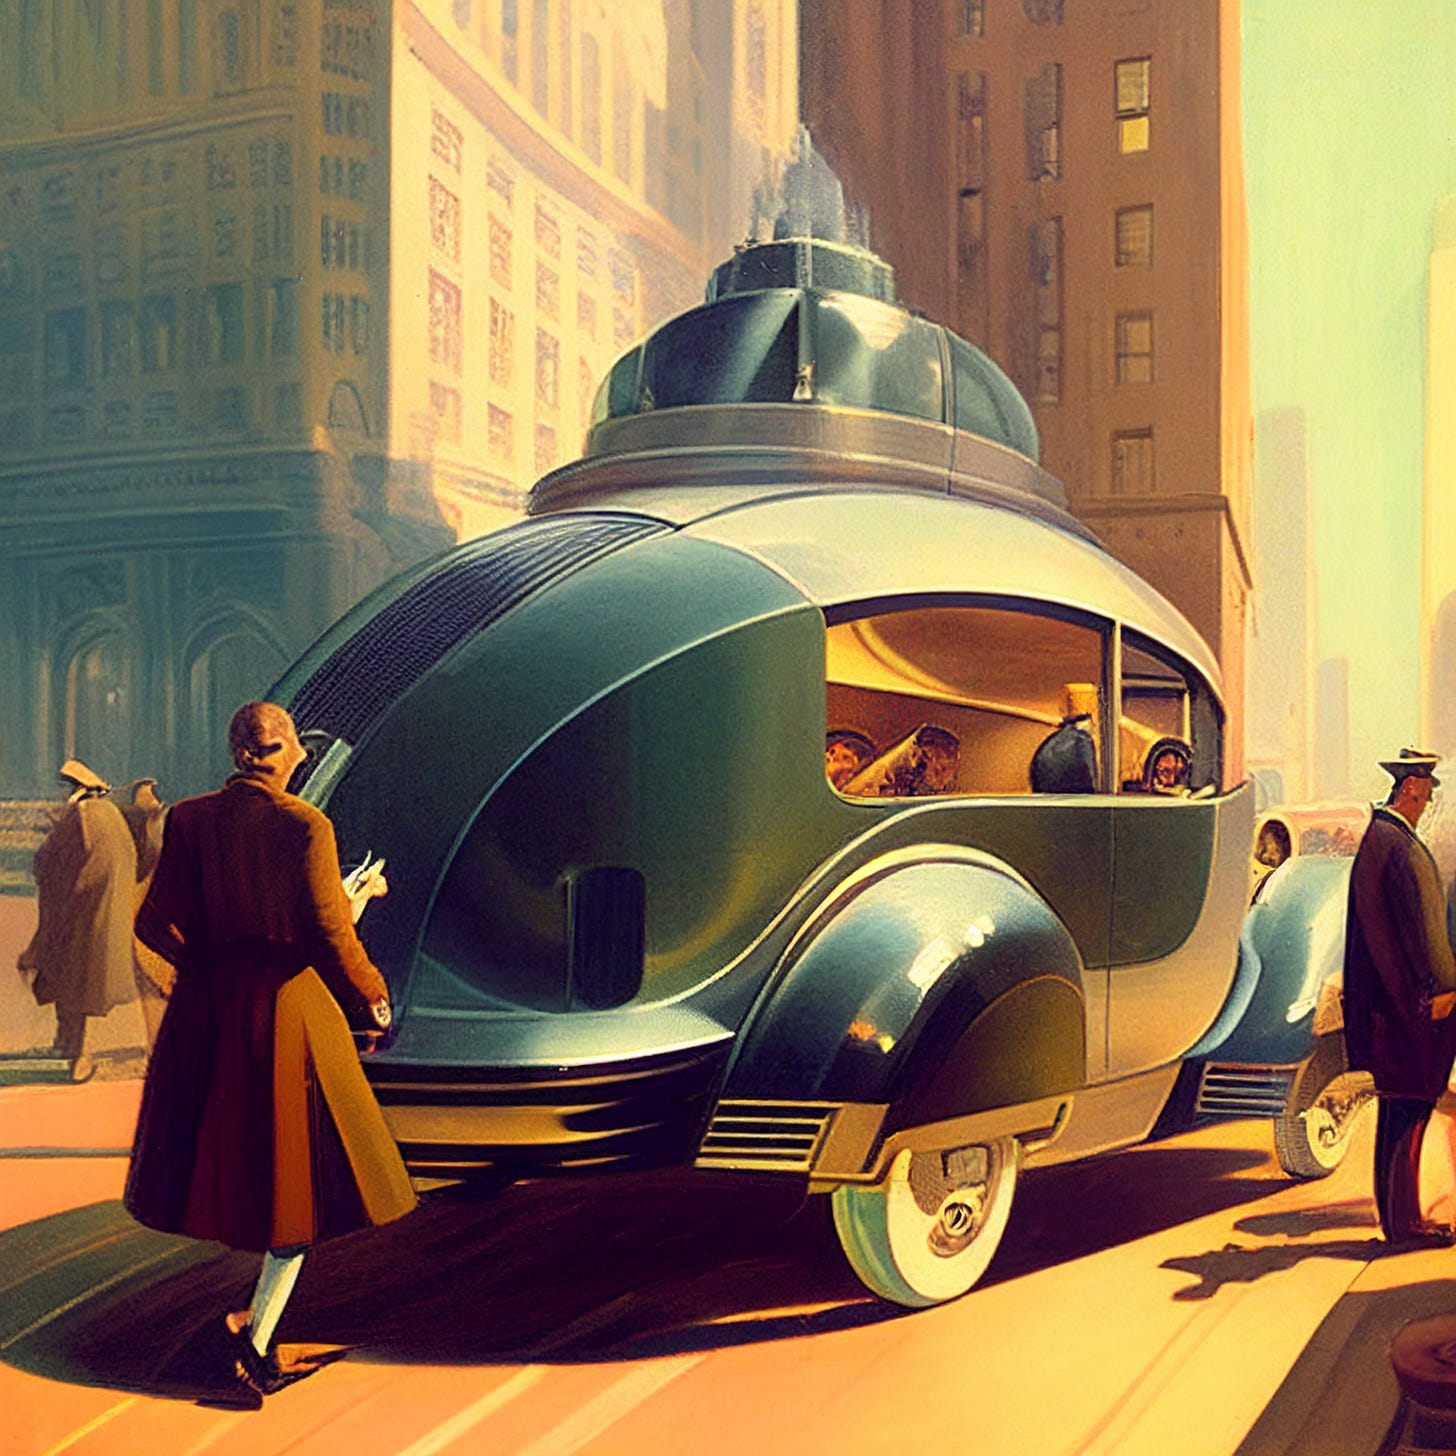 How people imagined future of self-driving cars in 1920s